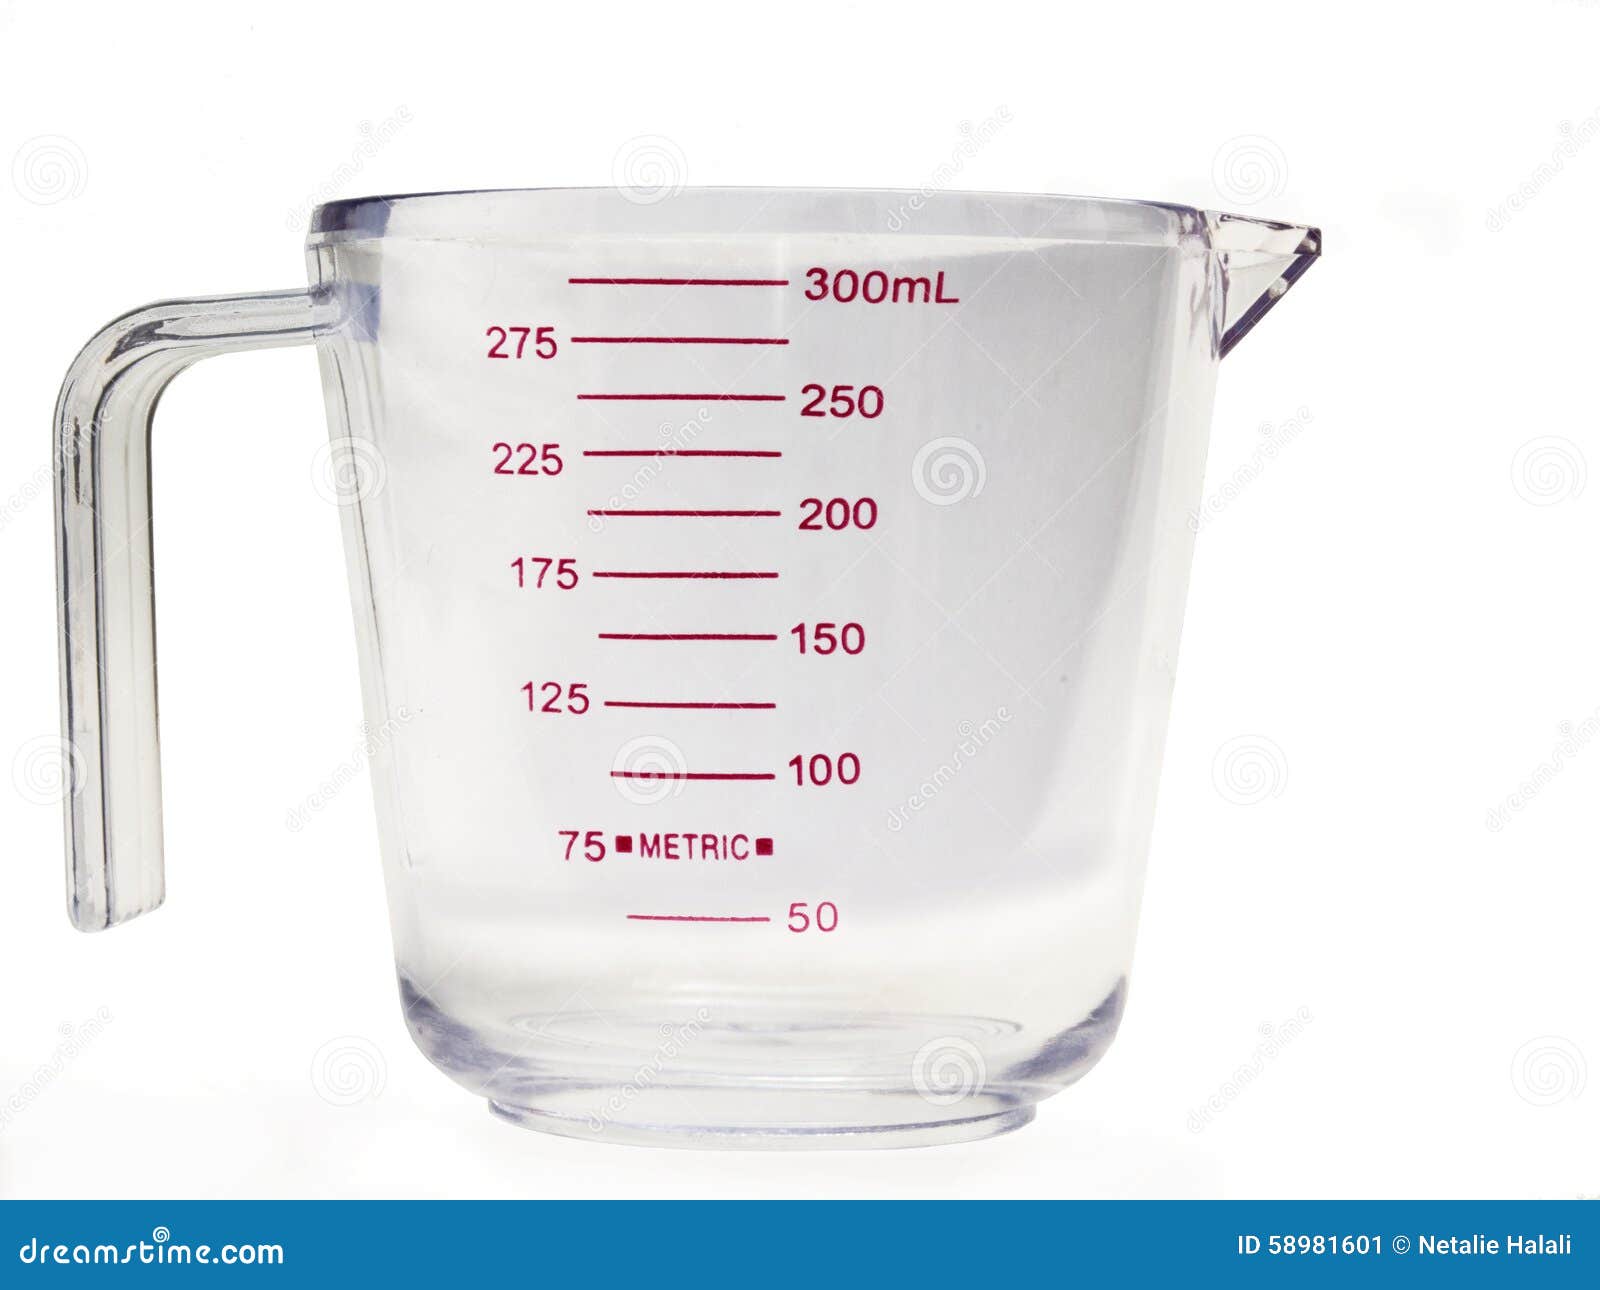 Milliliter small measuring cup with scale gram container measuring cup measuring cup ounce cup